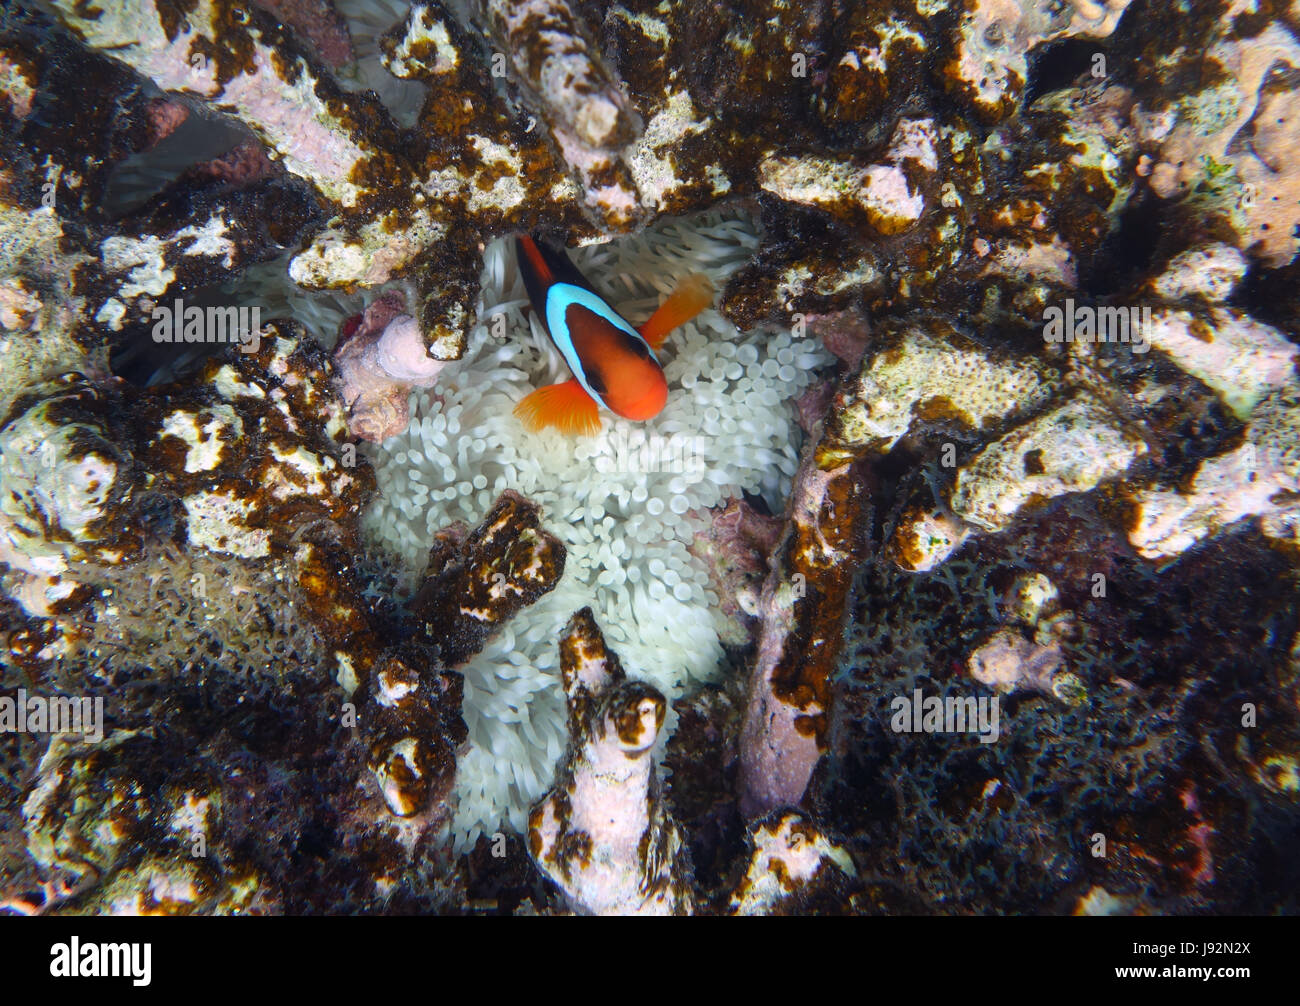 Anemonefish on bleached anemone amongst dead coral, Great Barrier Reef, Queensland, Australia, March2017 Stock Photo